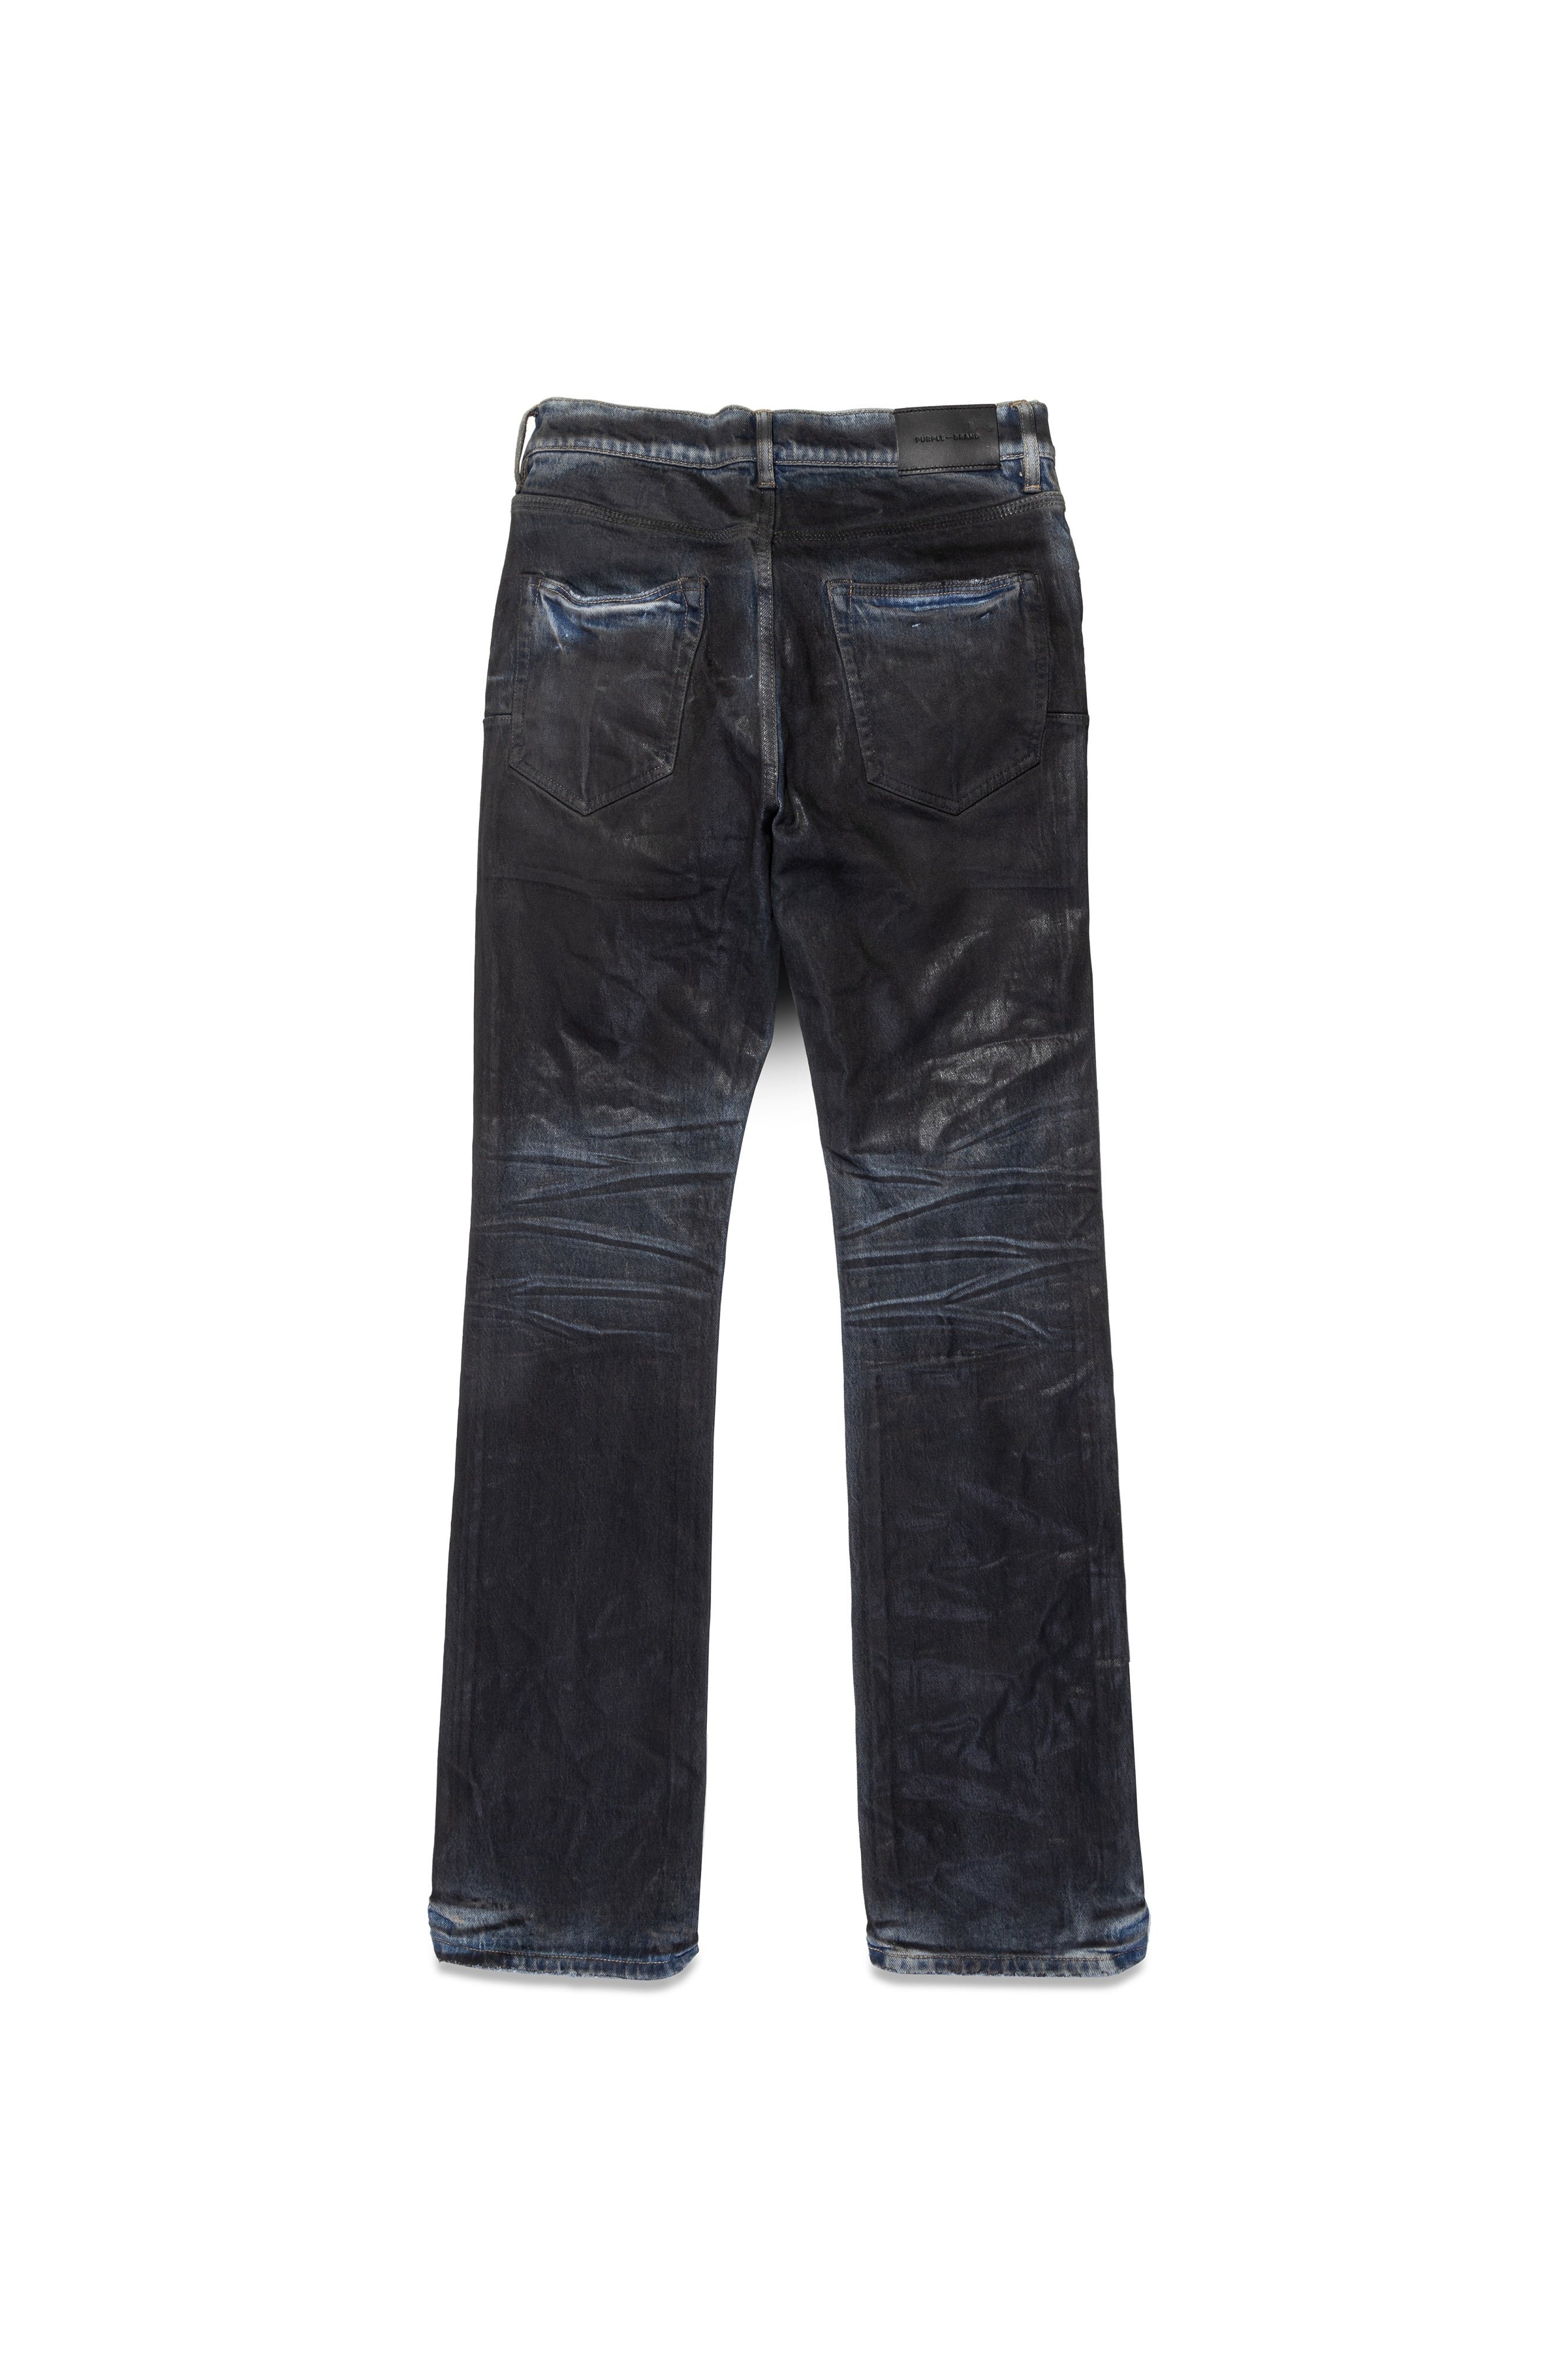 Purple Denim Jeans - Dirty Coated Flare – InStyle-Tuscaloosa